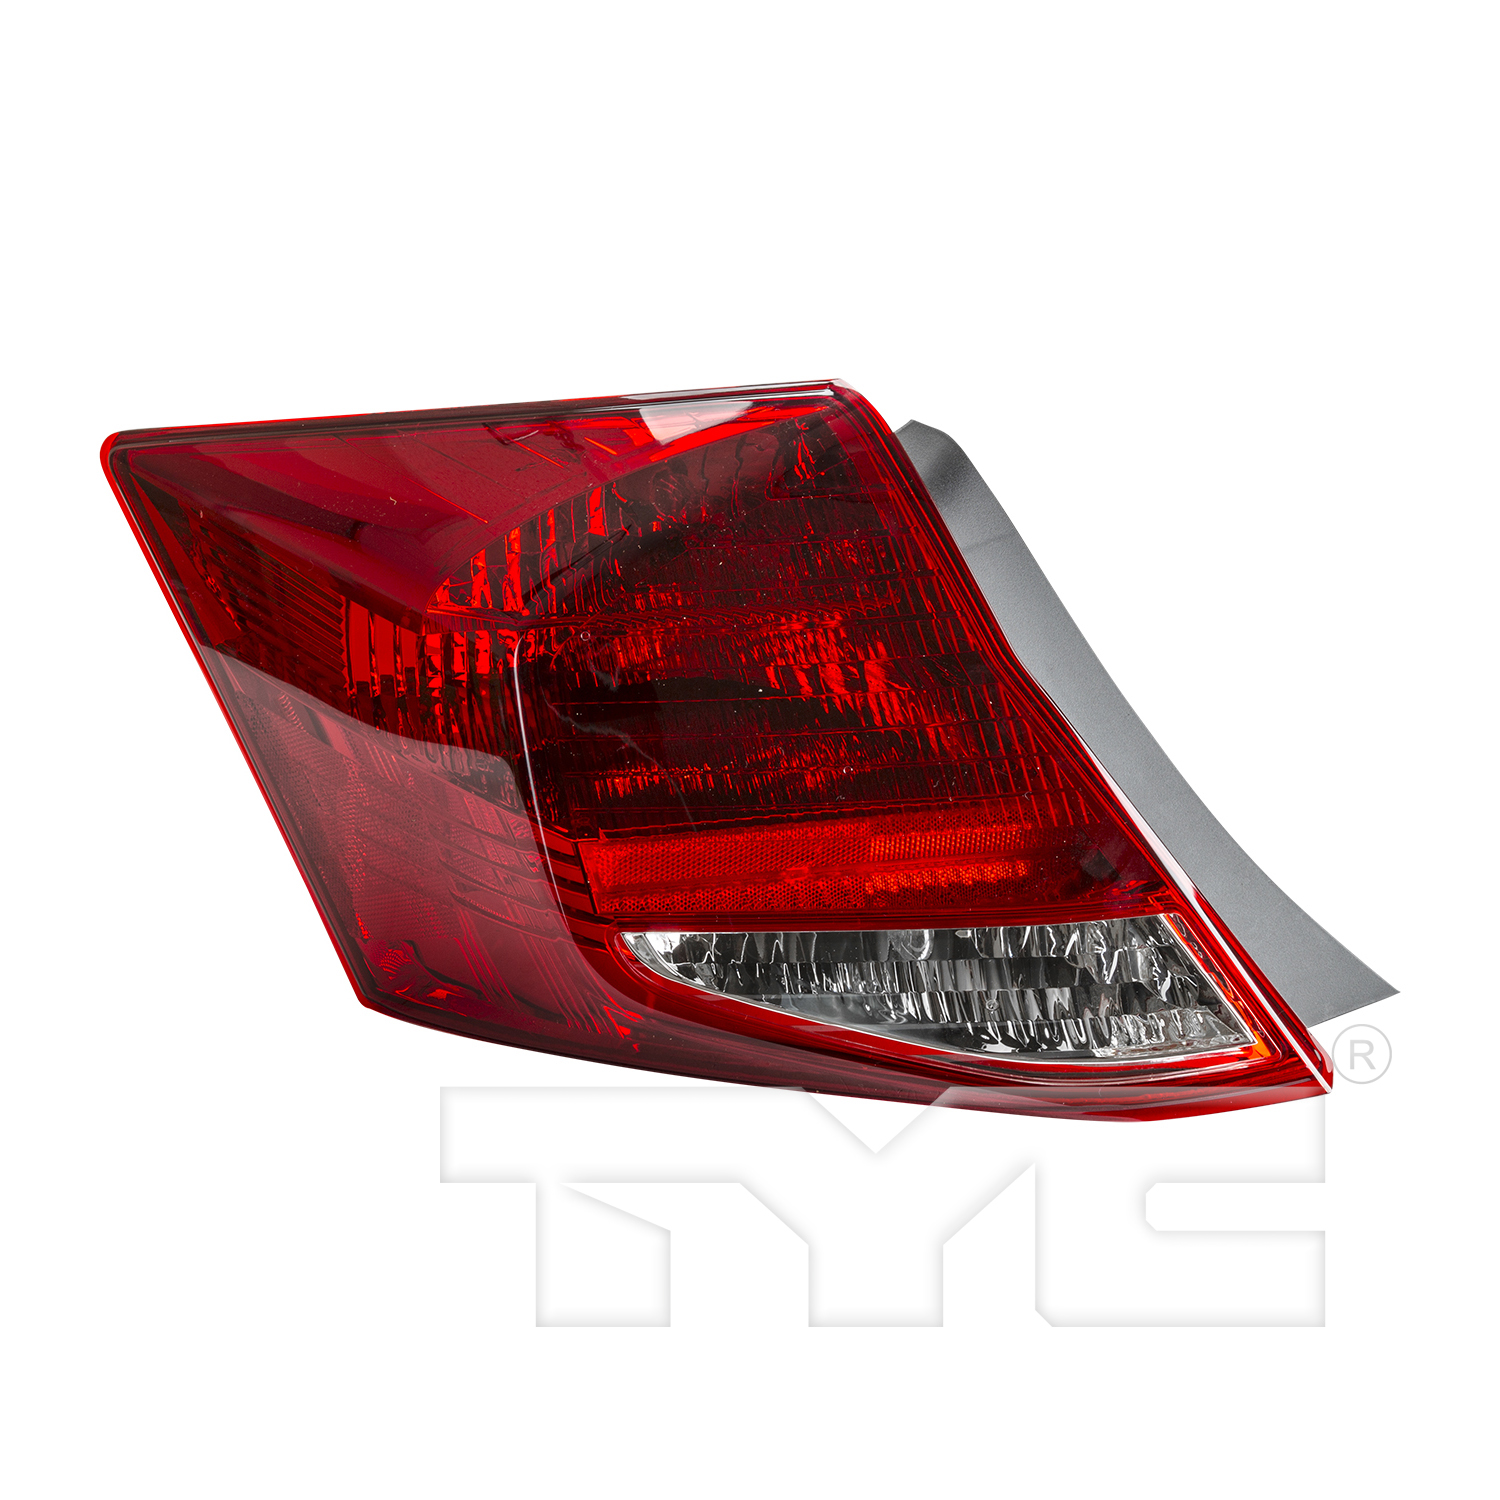 Aftermarket TAILLIGHTS for HONDA - ACCORD, ACCORD,11-12,LT Taillamp assy